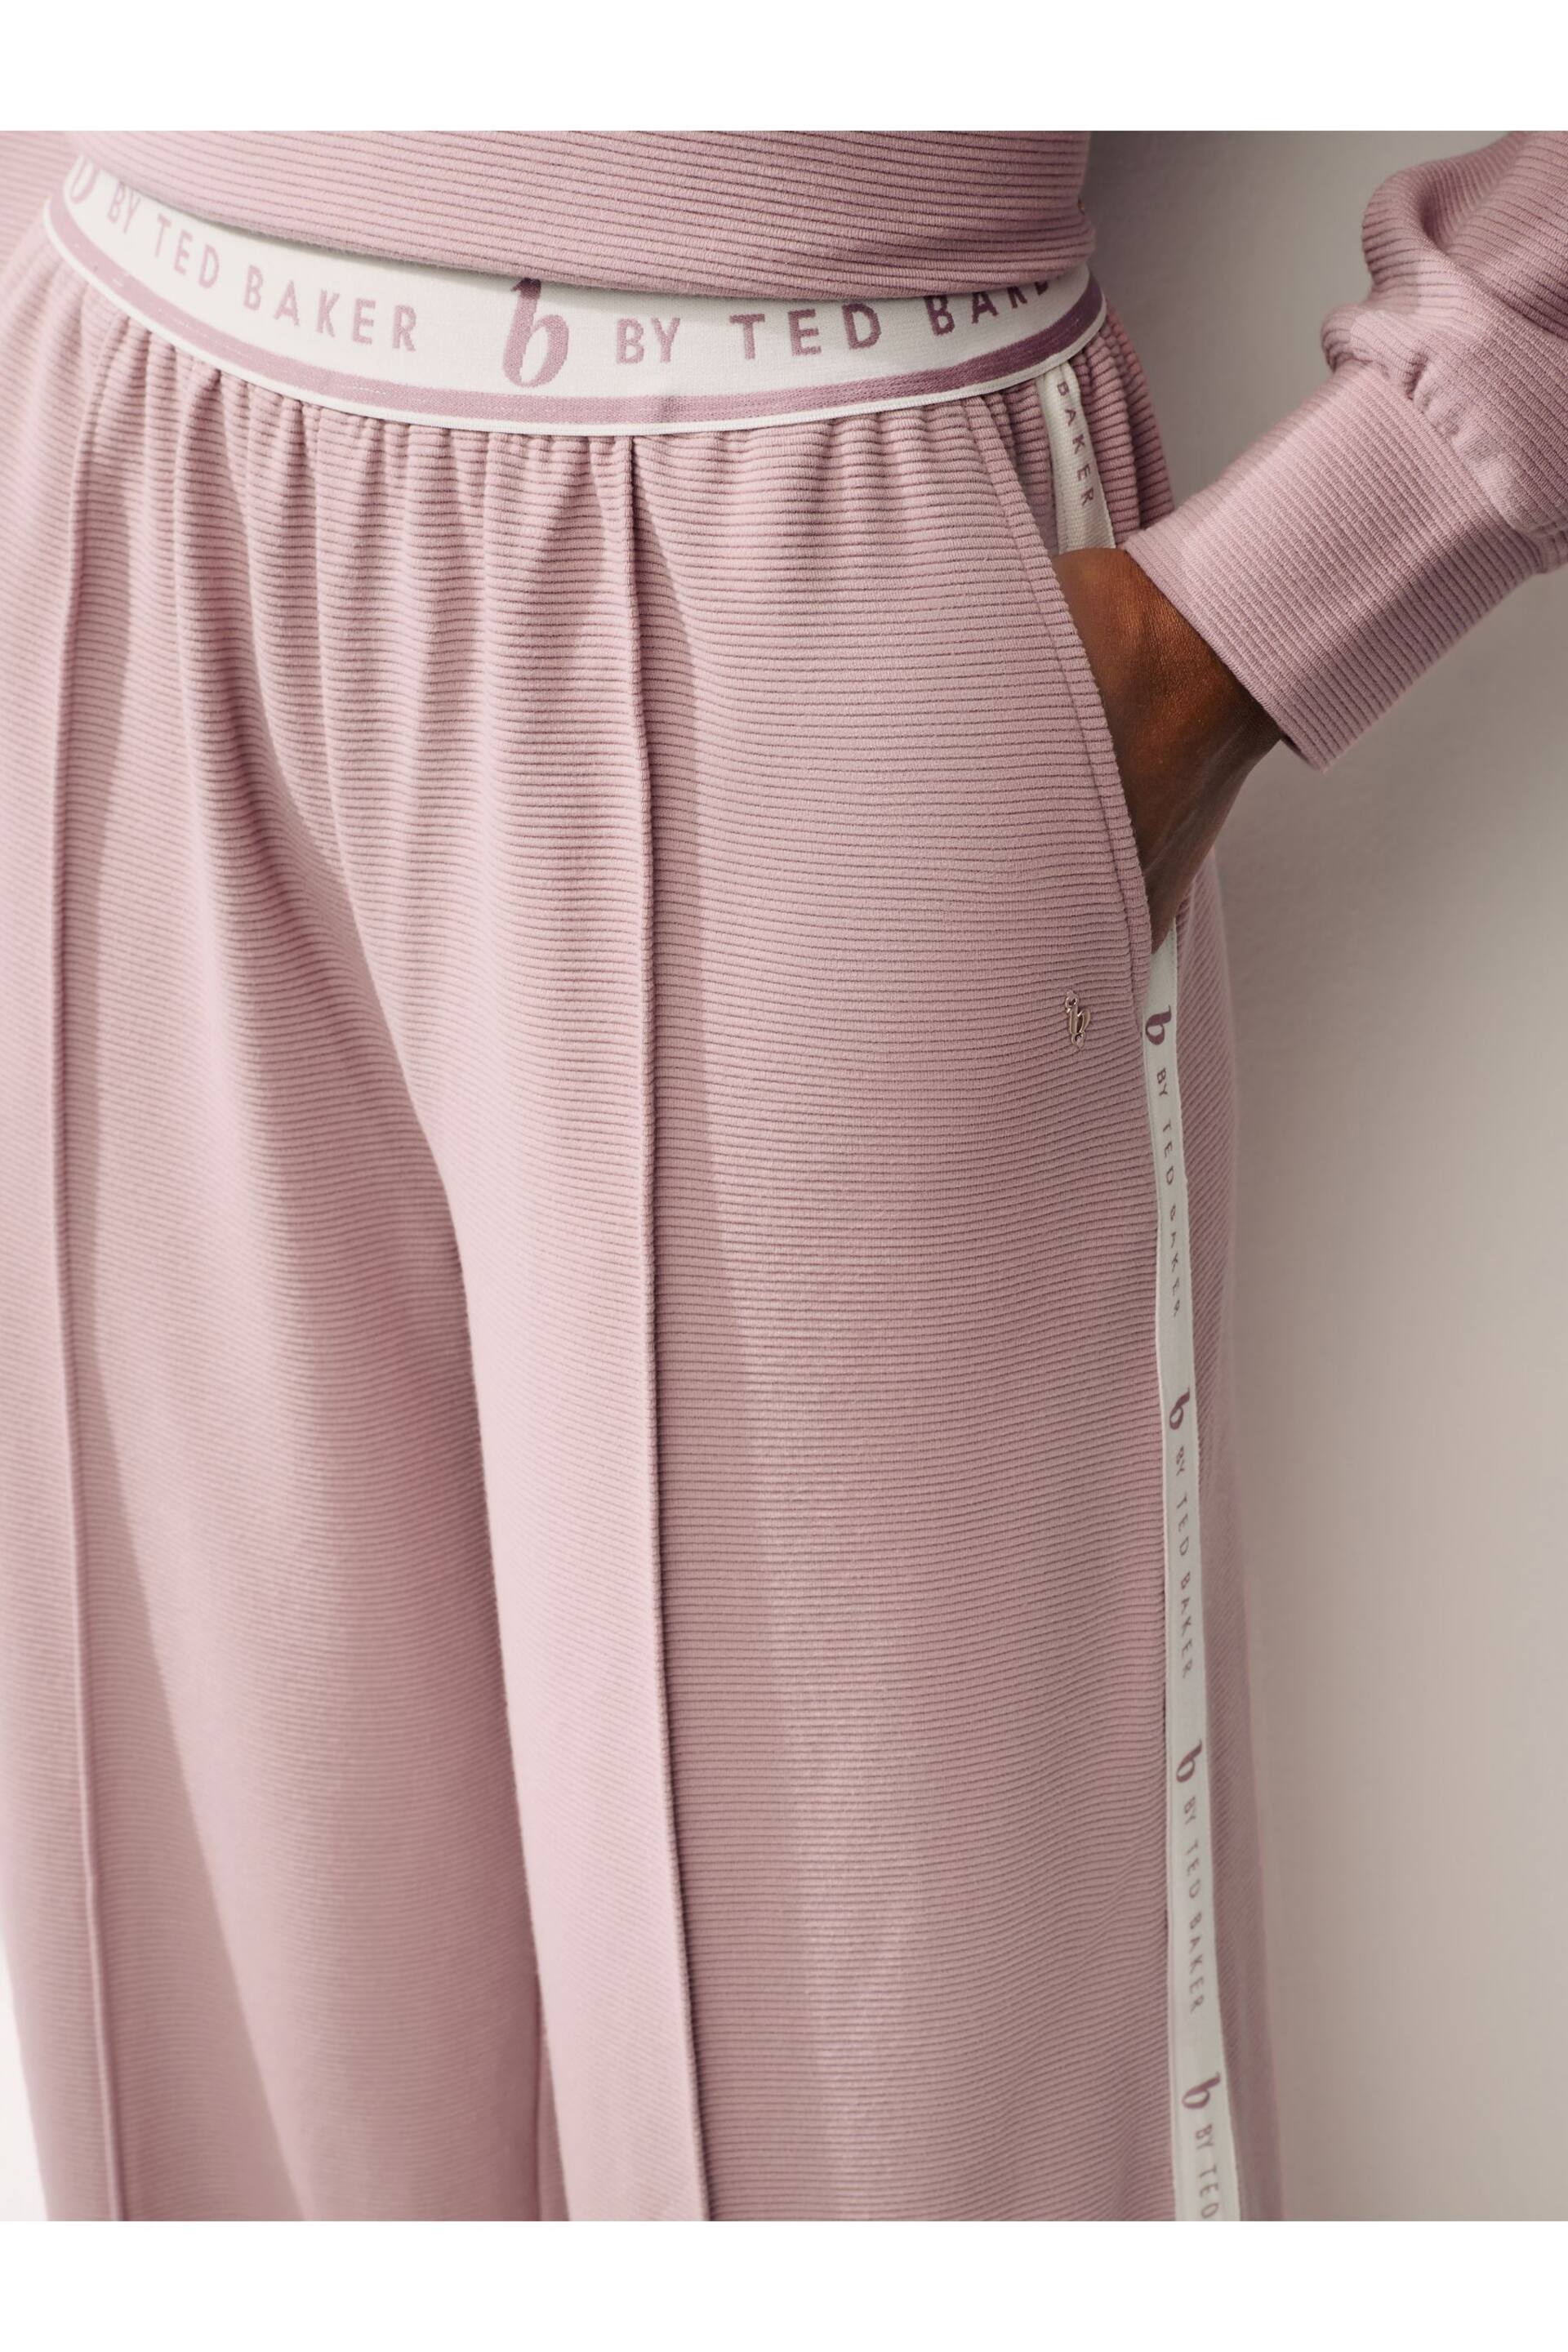 B by Ted Baker Ribbed Wide Leg Joggers - Image 5 of 5